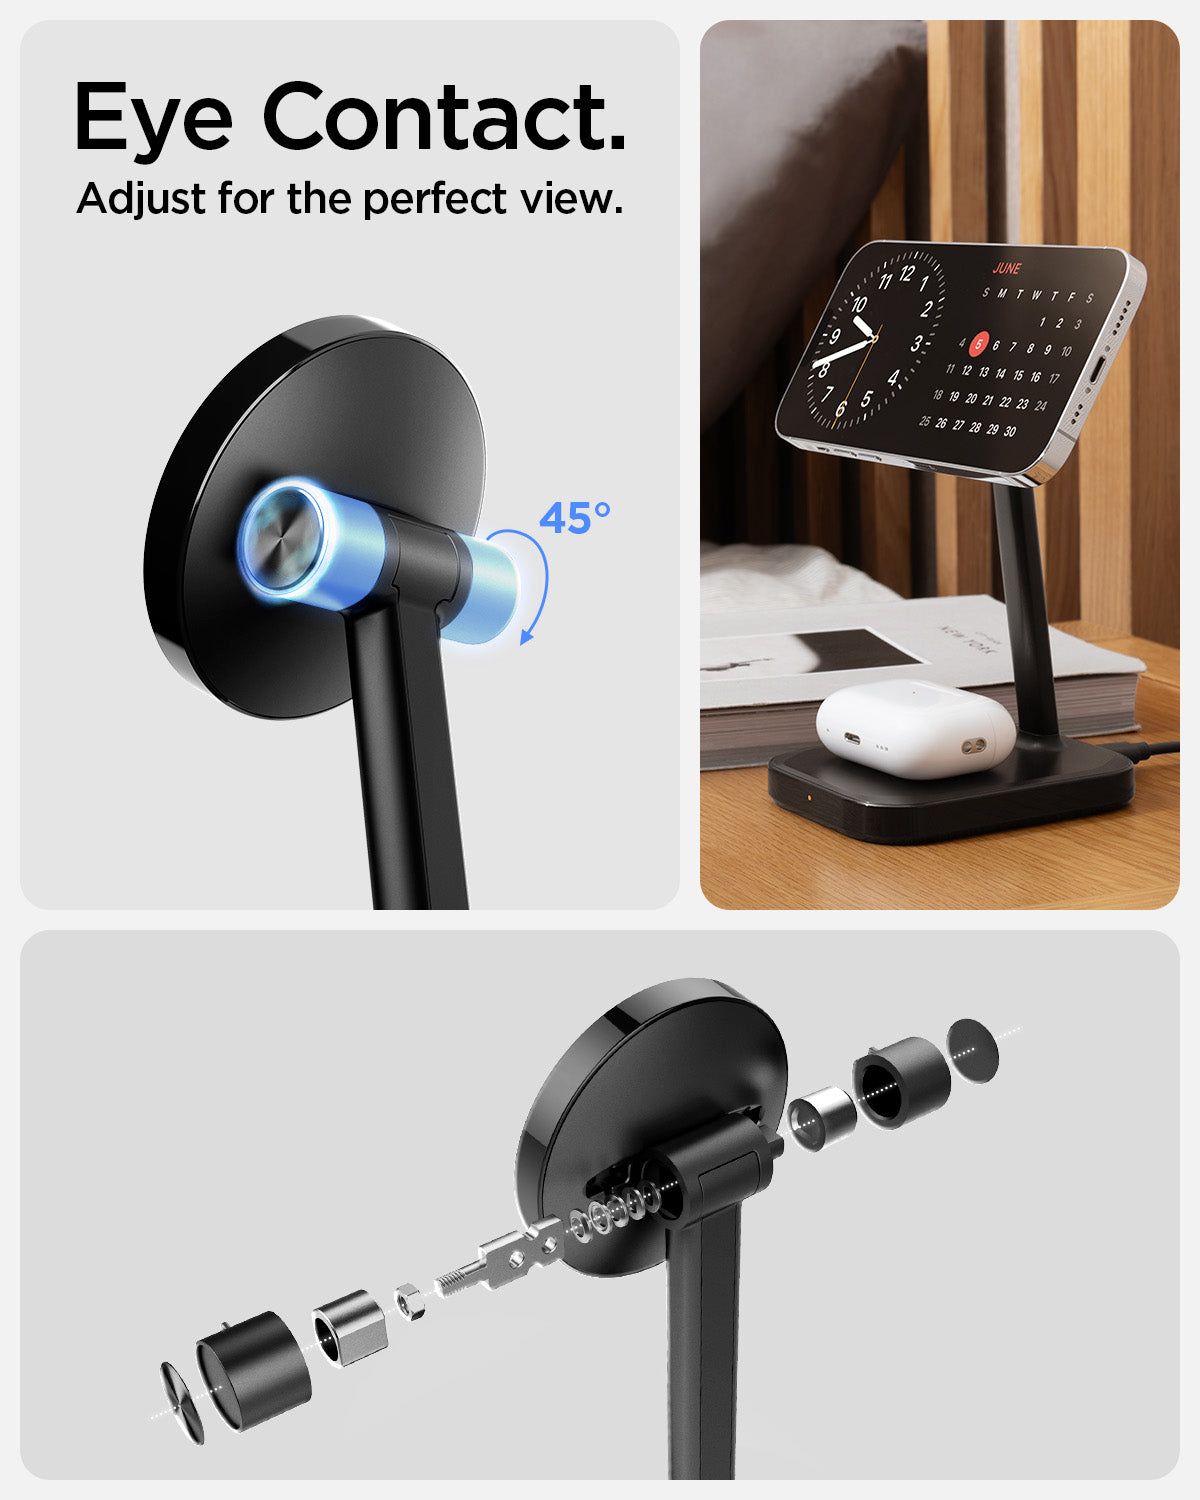 ACH05439 - ArcField™ Magnetic Wireless Charger Stand PF2100 (MagFit) in Black showing the Eye Contact. Adjust for the perfect view. 3 charger stand one shows 45° rotation, airPods charging and volts and parts detached from the charging stand